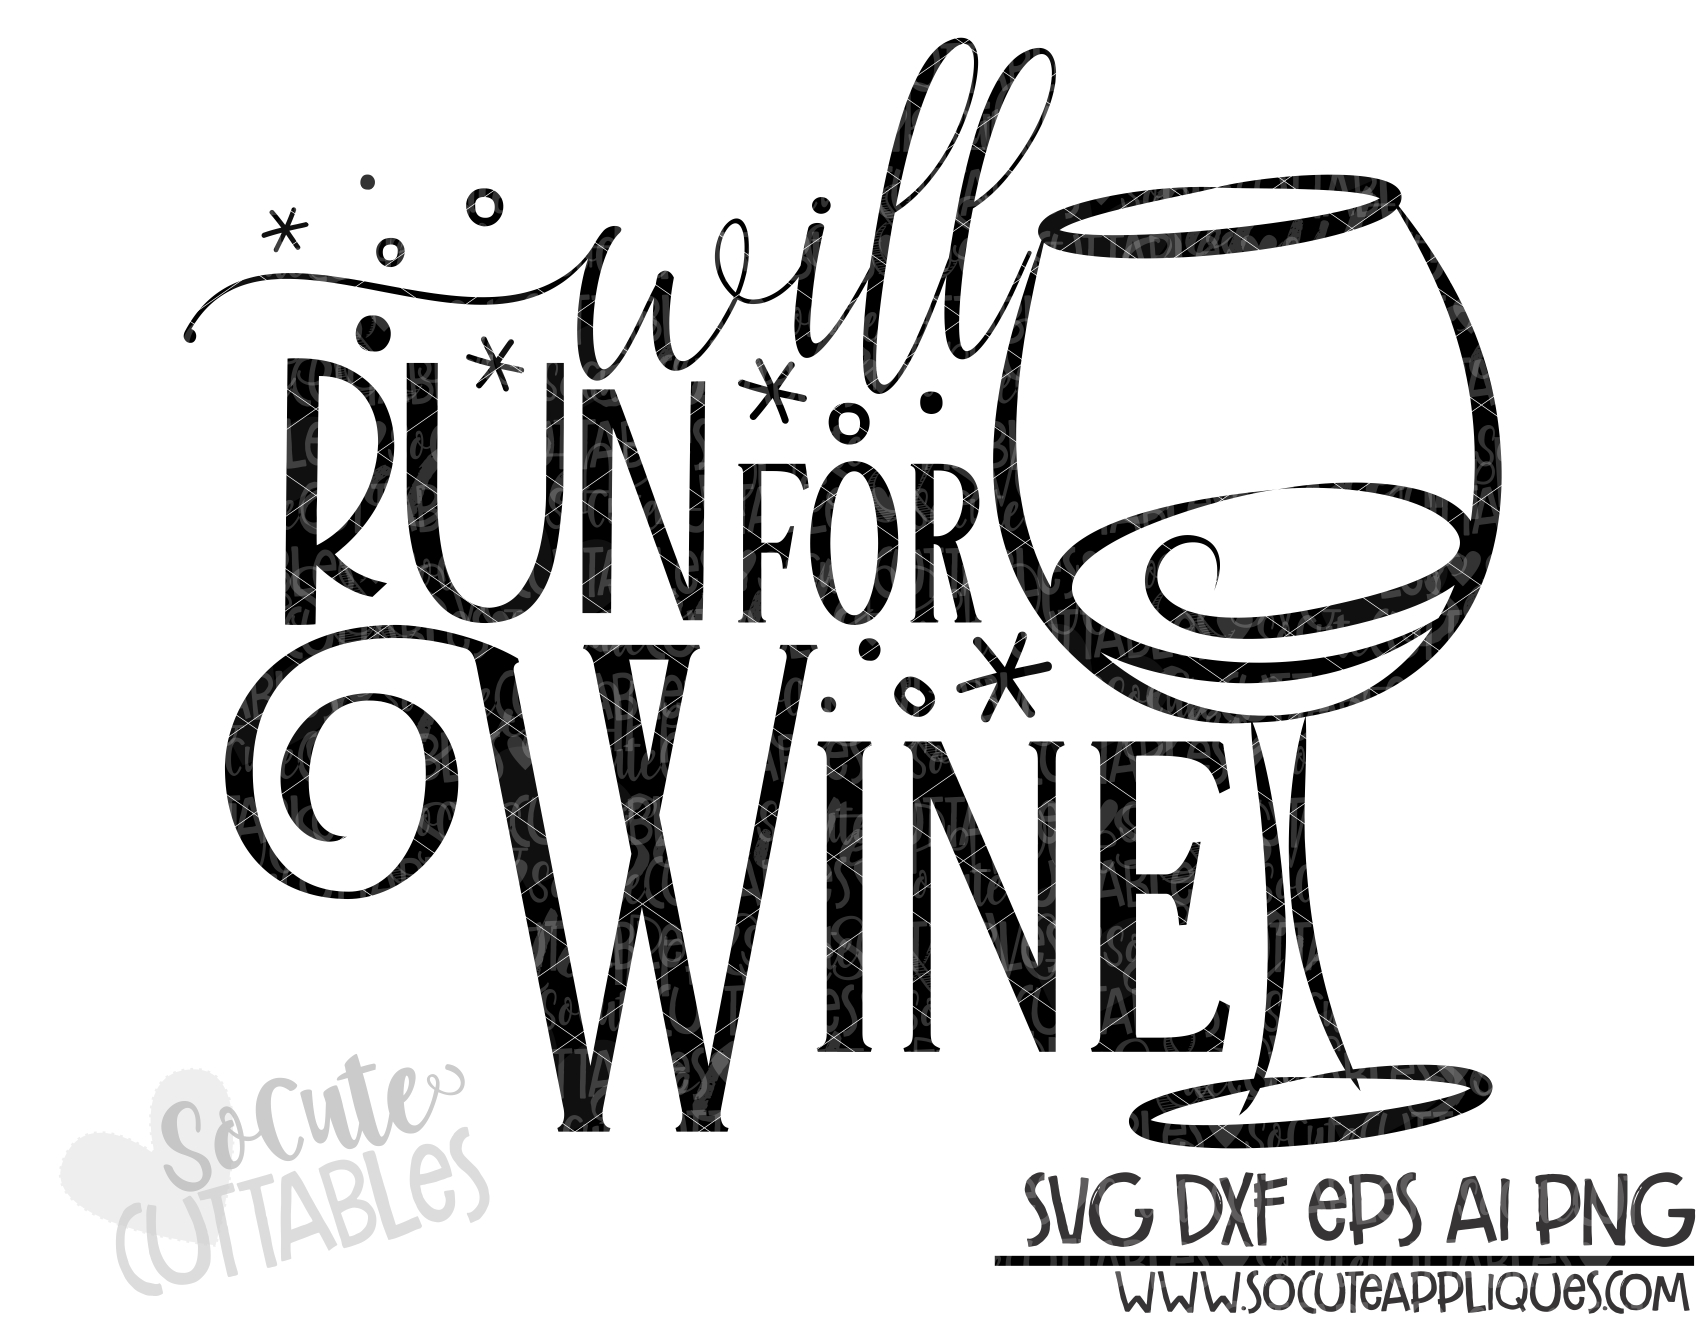 Will Run For Wine 19 Scc Svg Socuteappliques Net